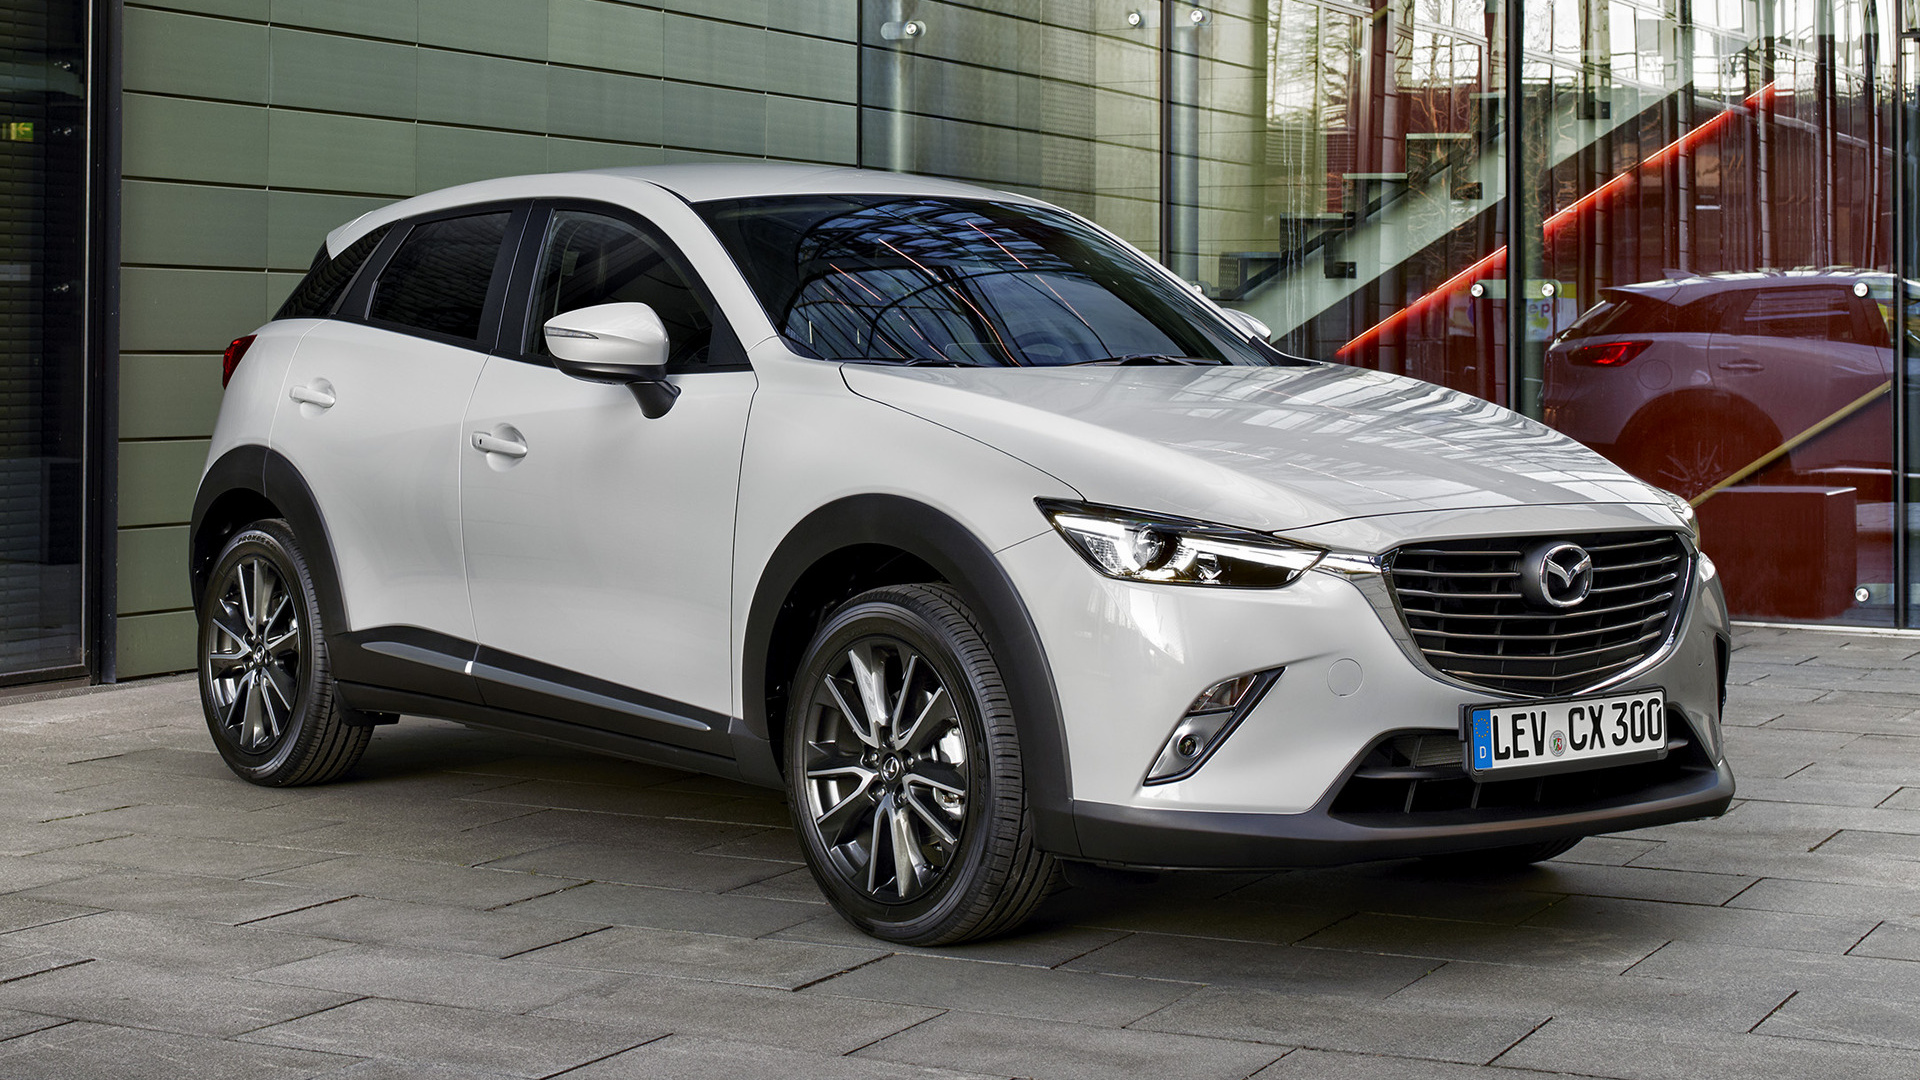 Mazda CX-3 (2015) Wallpapers and HD Images - Car Pixel